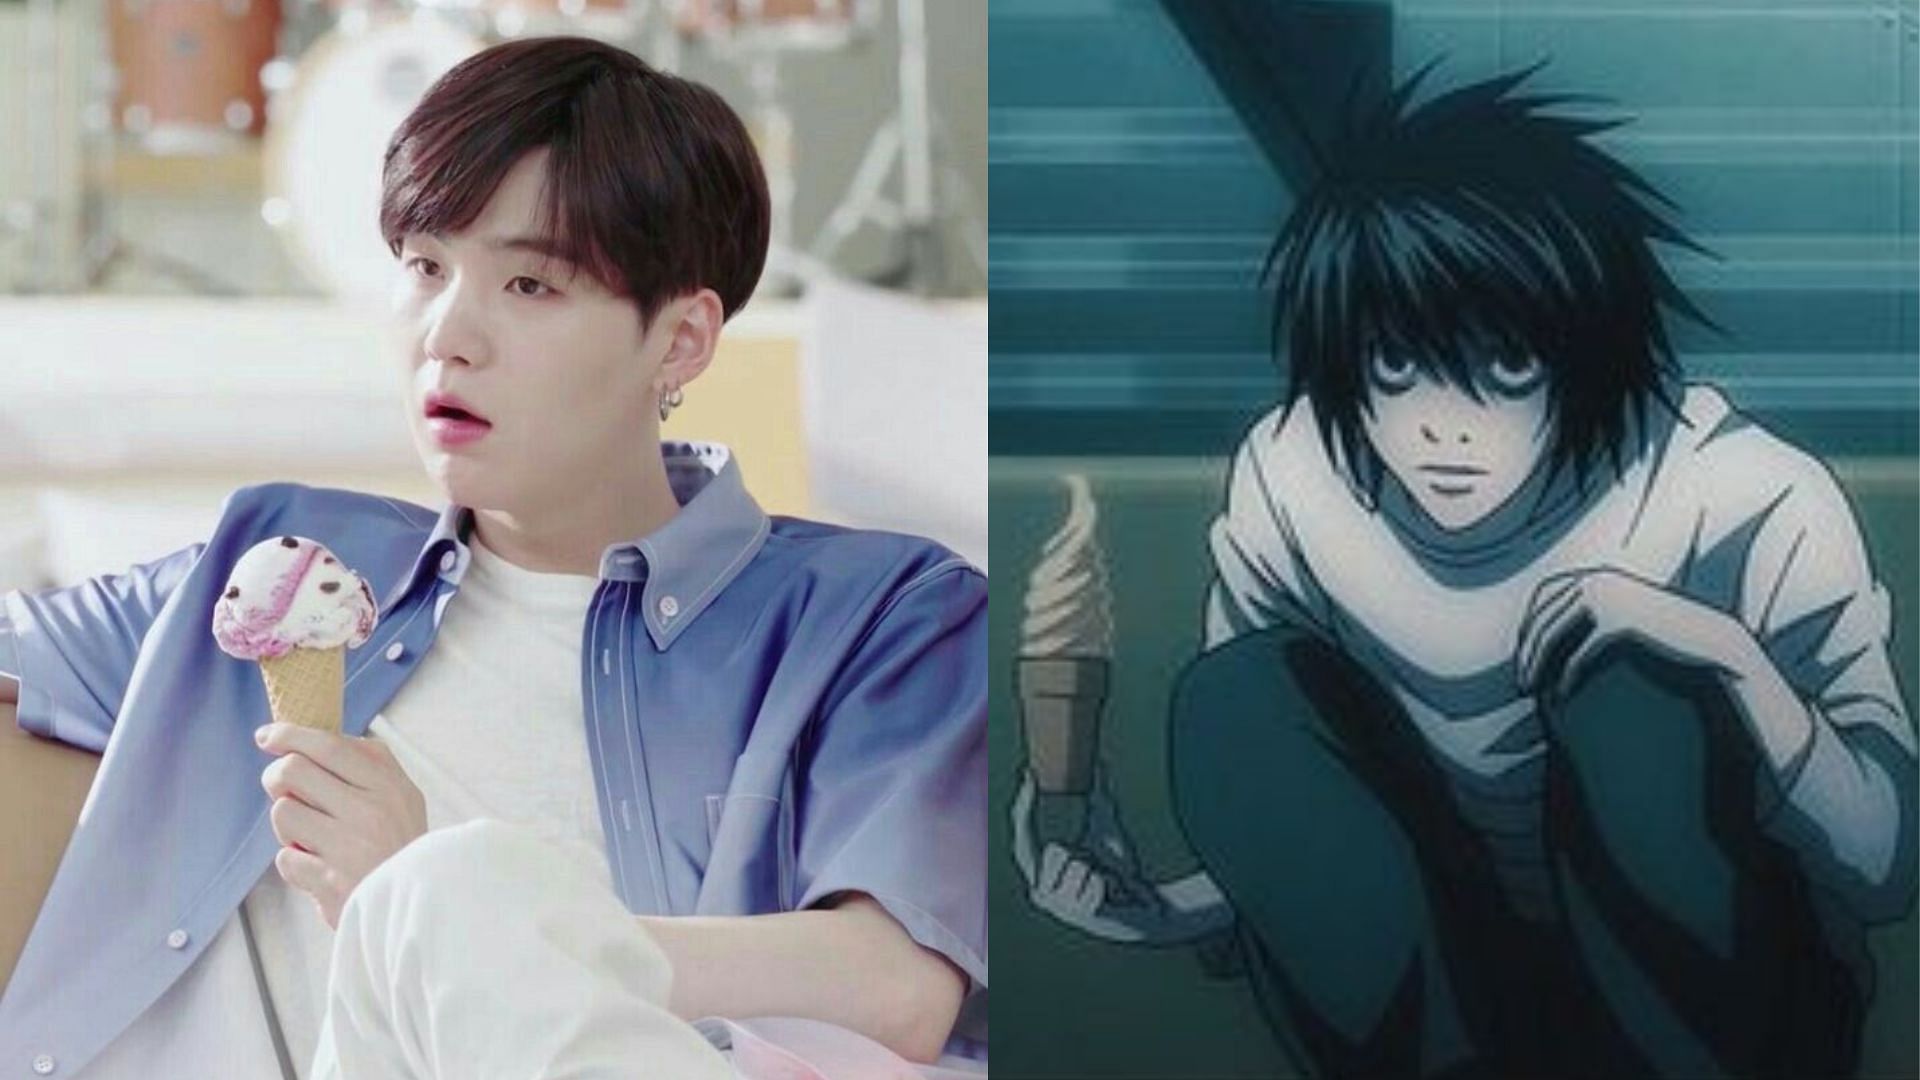 BTS members as anime characters: Jin as Gojo, RM as Loid, and more